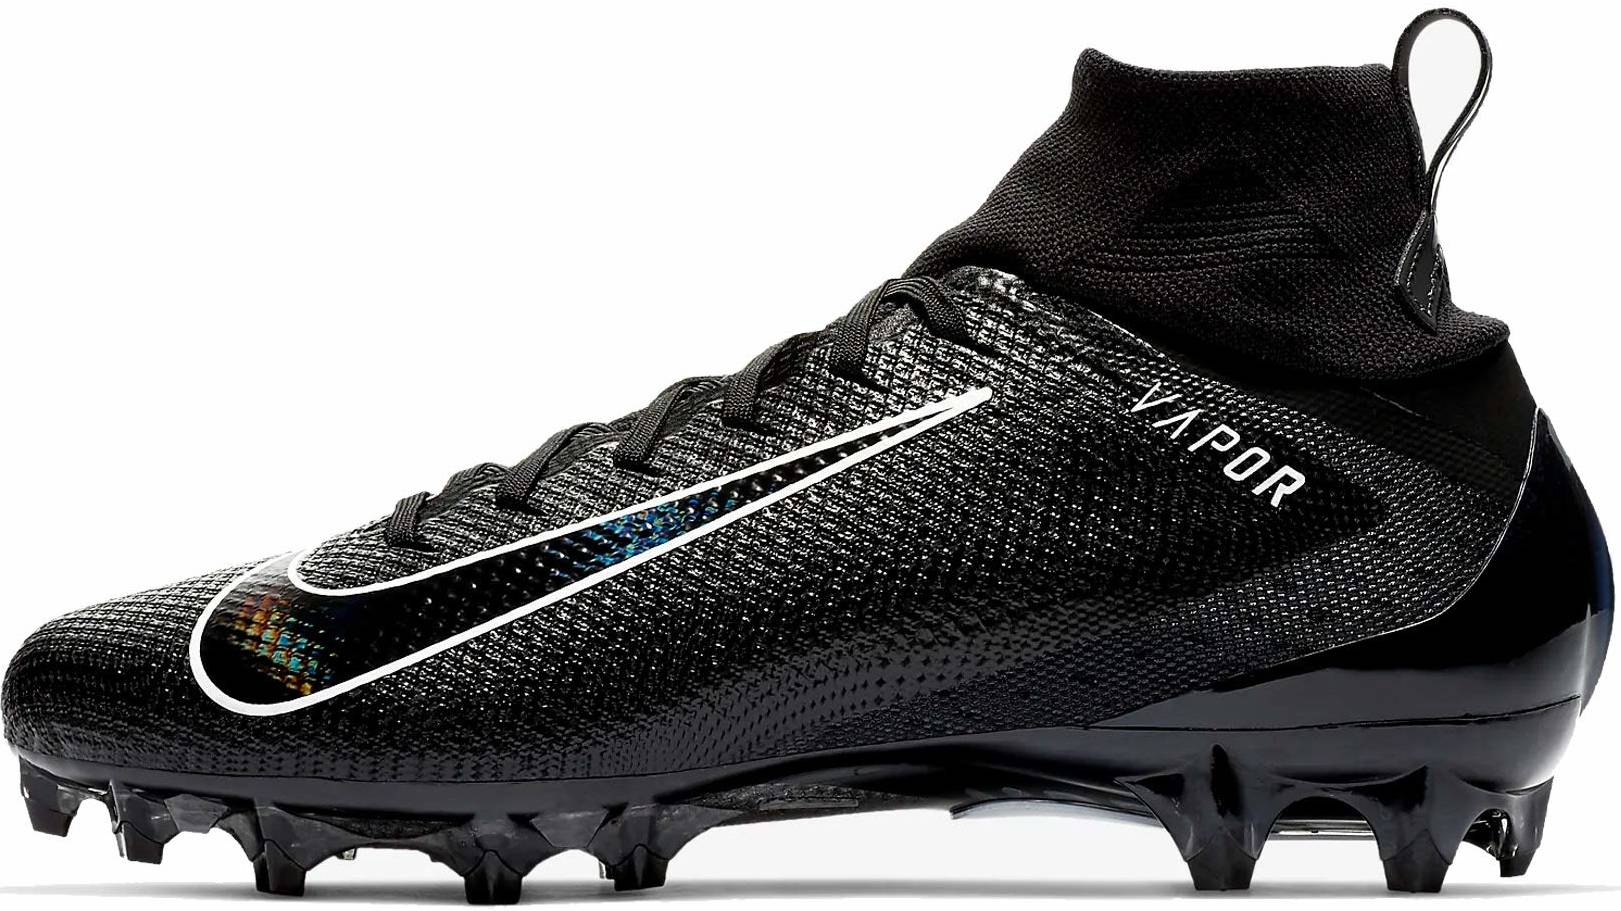 Save 61% on Wide Football Cleats (41 